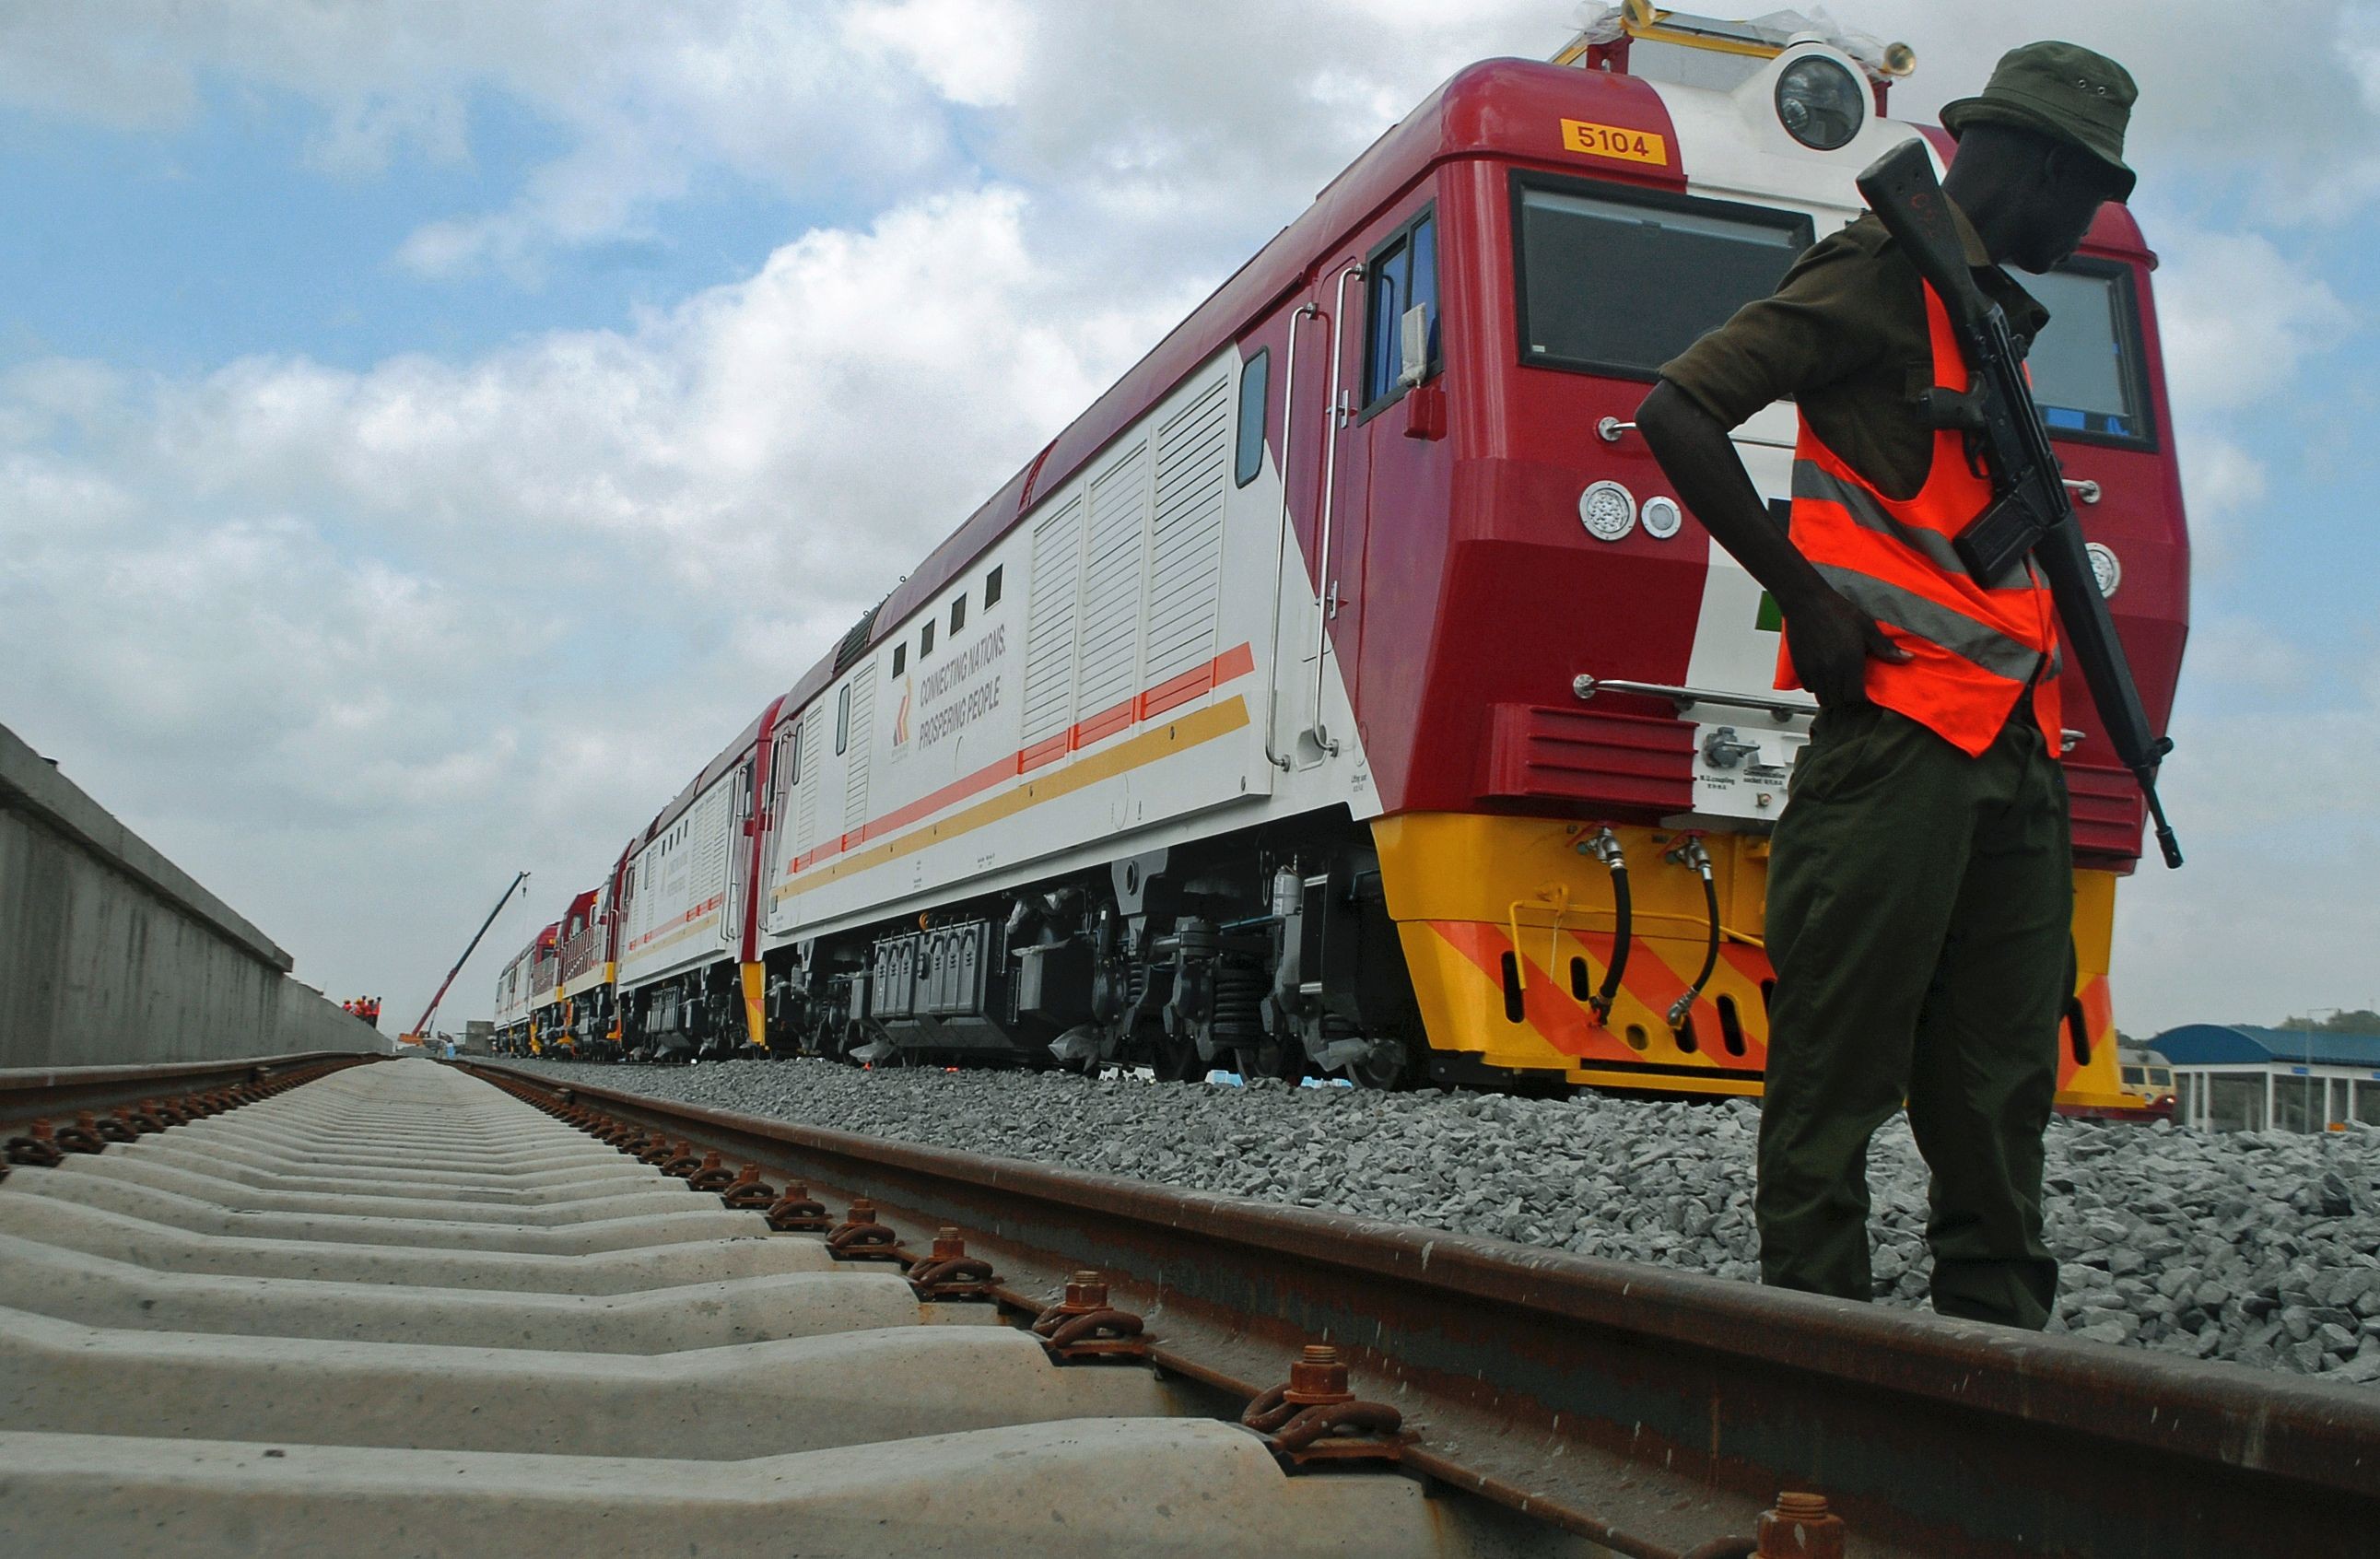 A security guard patrols during the launch of the first batch of Standard Gauge Railway (SGR) freight locomotives at the port in Mombasa last January. The SGR system, the biggest infrastructure project in Kenya since independence, is being built by the state-owned China Road and Bridge Corporation, with plans to connect Kenya, Uganda, Rwanda and South Sudan to Mombasa. Photo: AFP